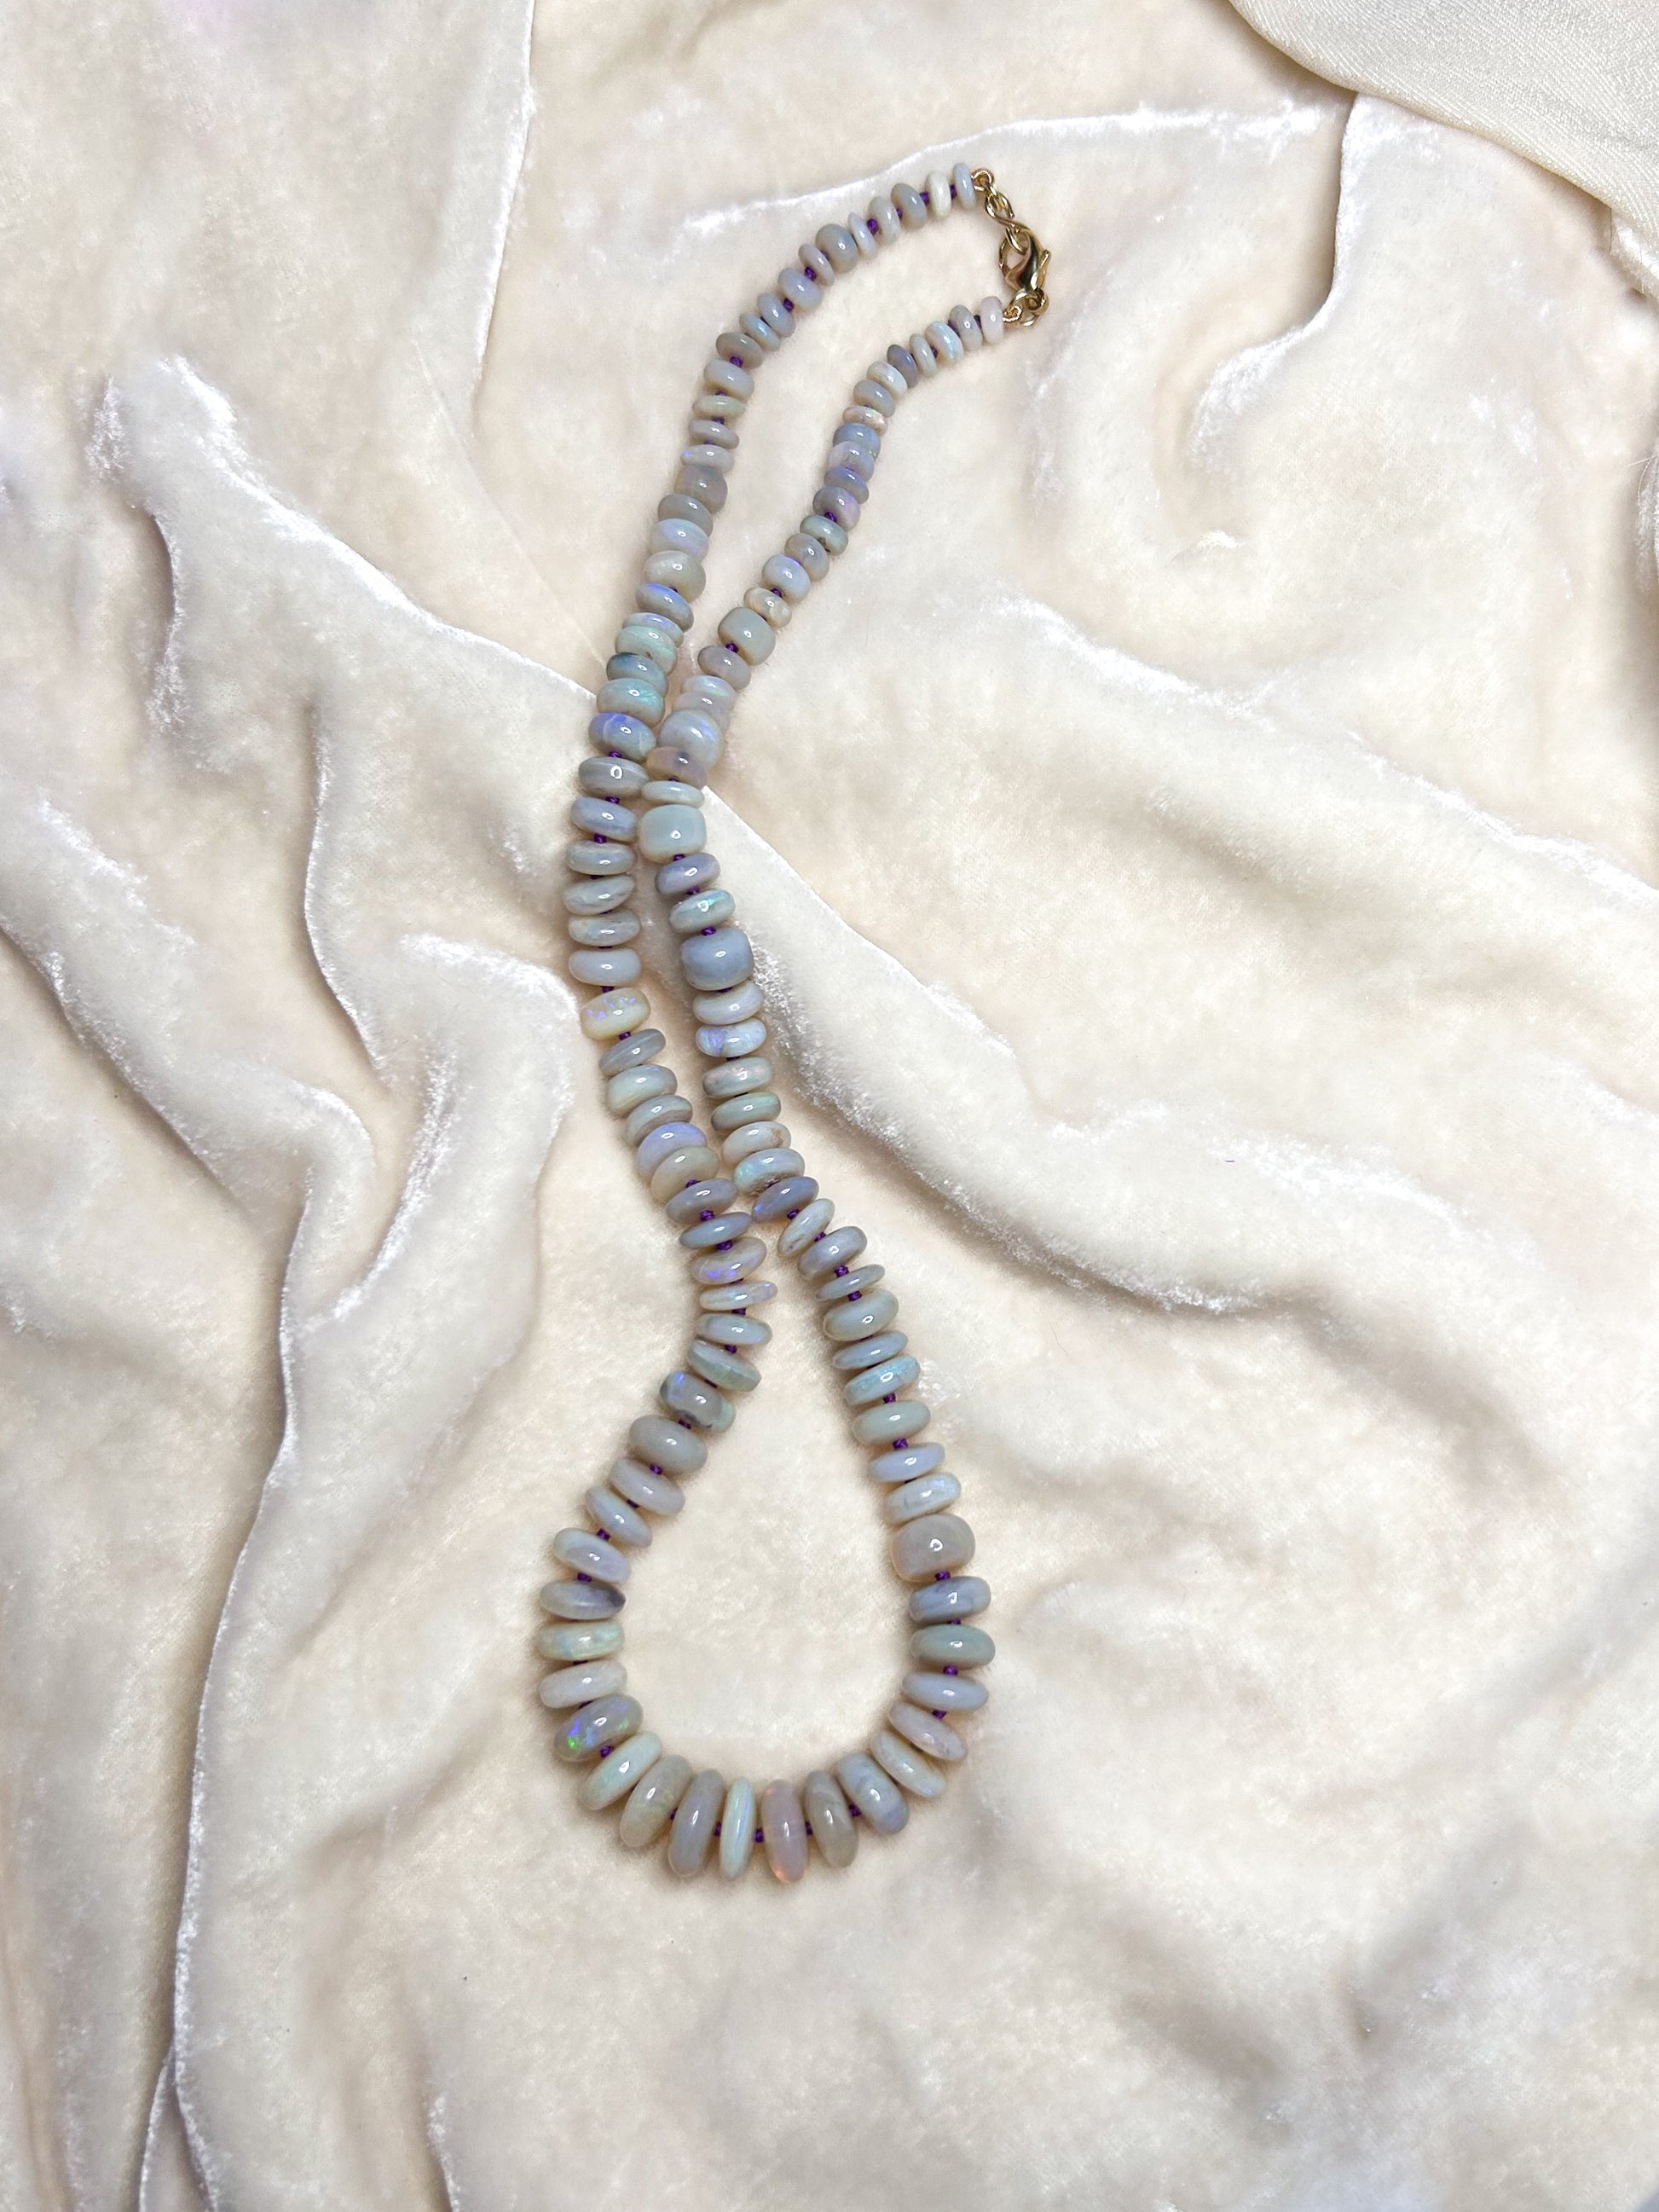 handcrafted Australian Opal knotted candy necklace with 14k gold